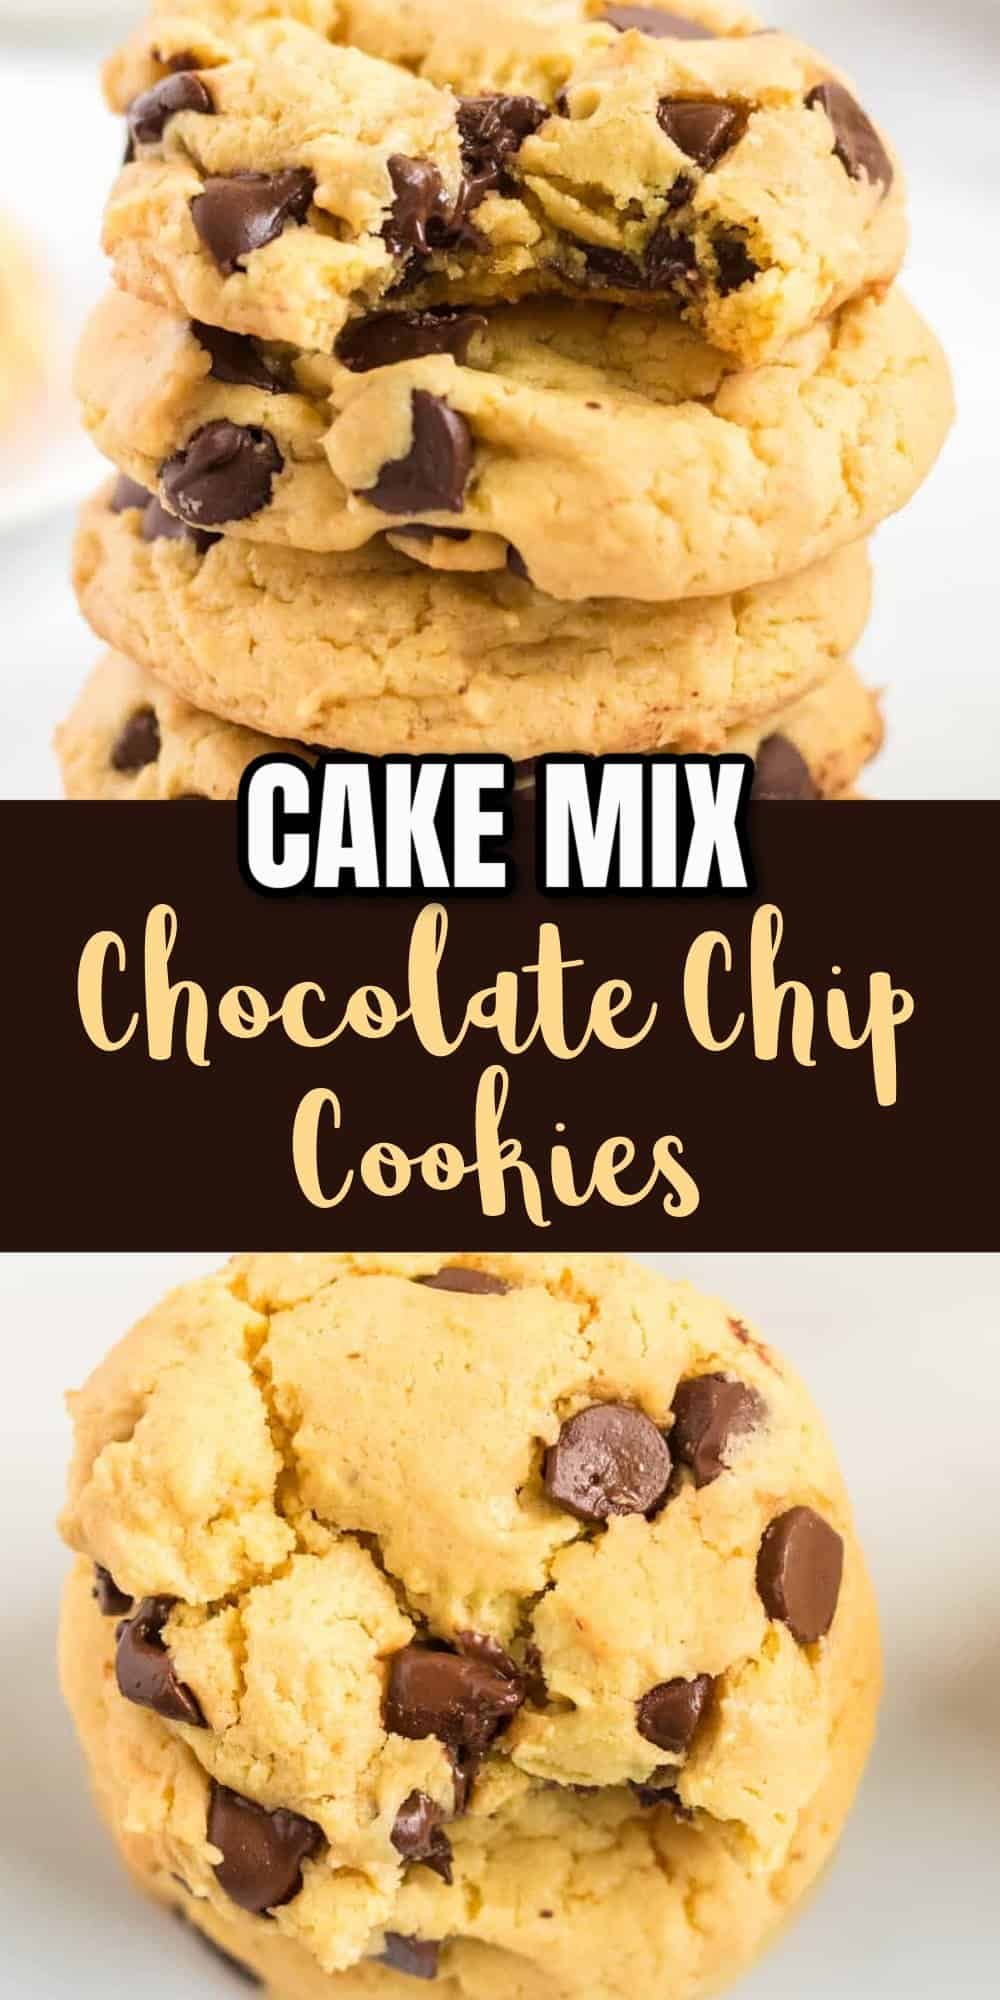 image with text saying "cake mix chocolate chip cookies"